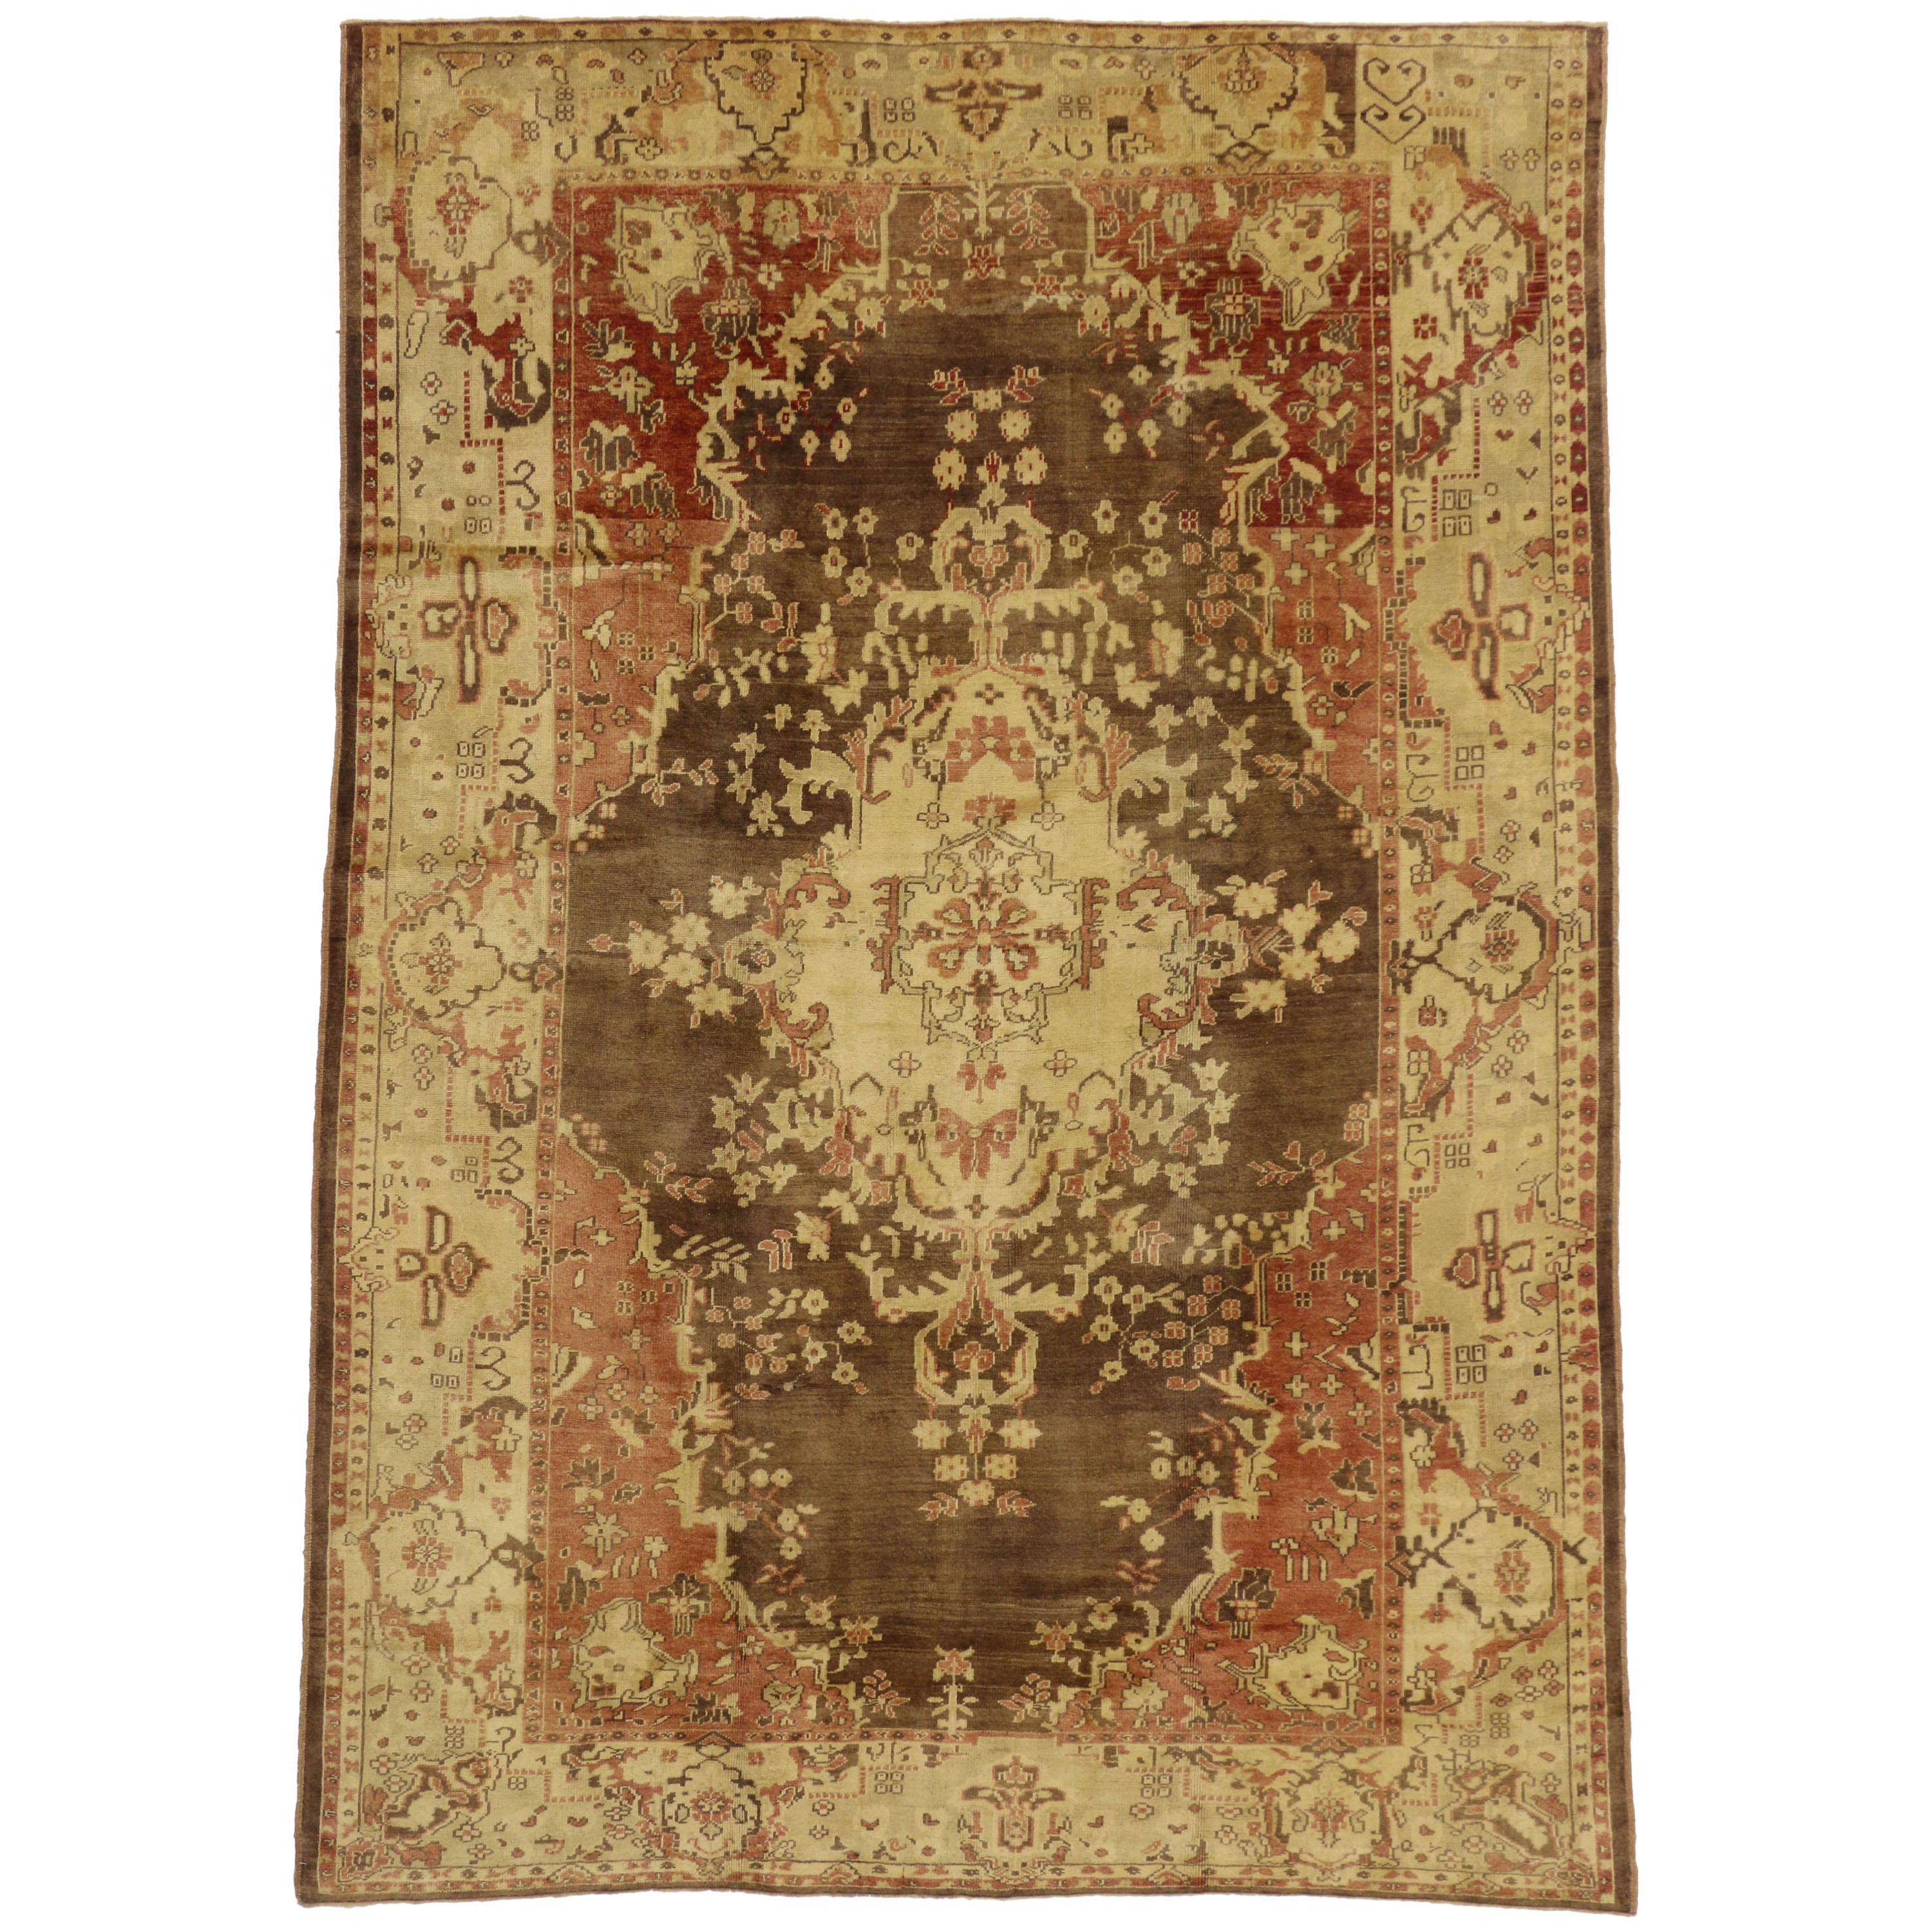 Vintage Turkish Oushak Rug with Rustic Arts and Crafts Style